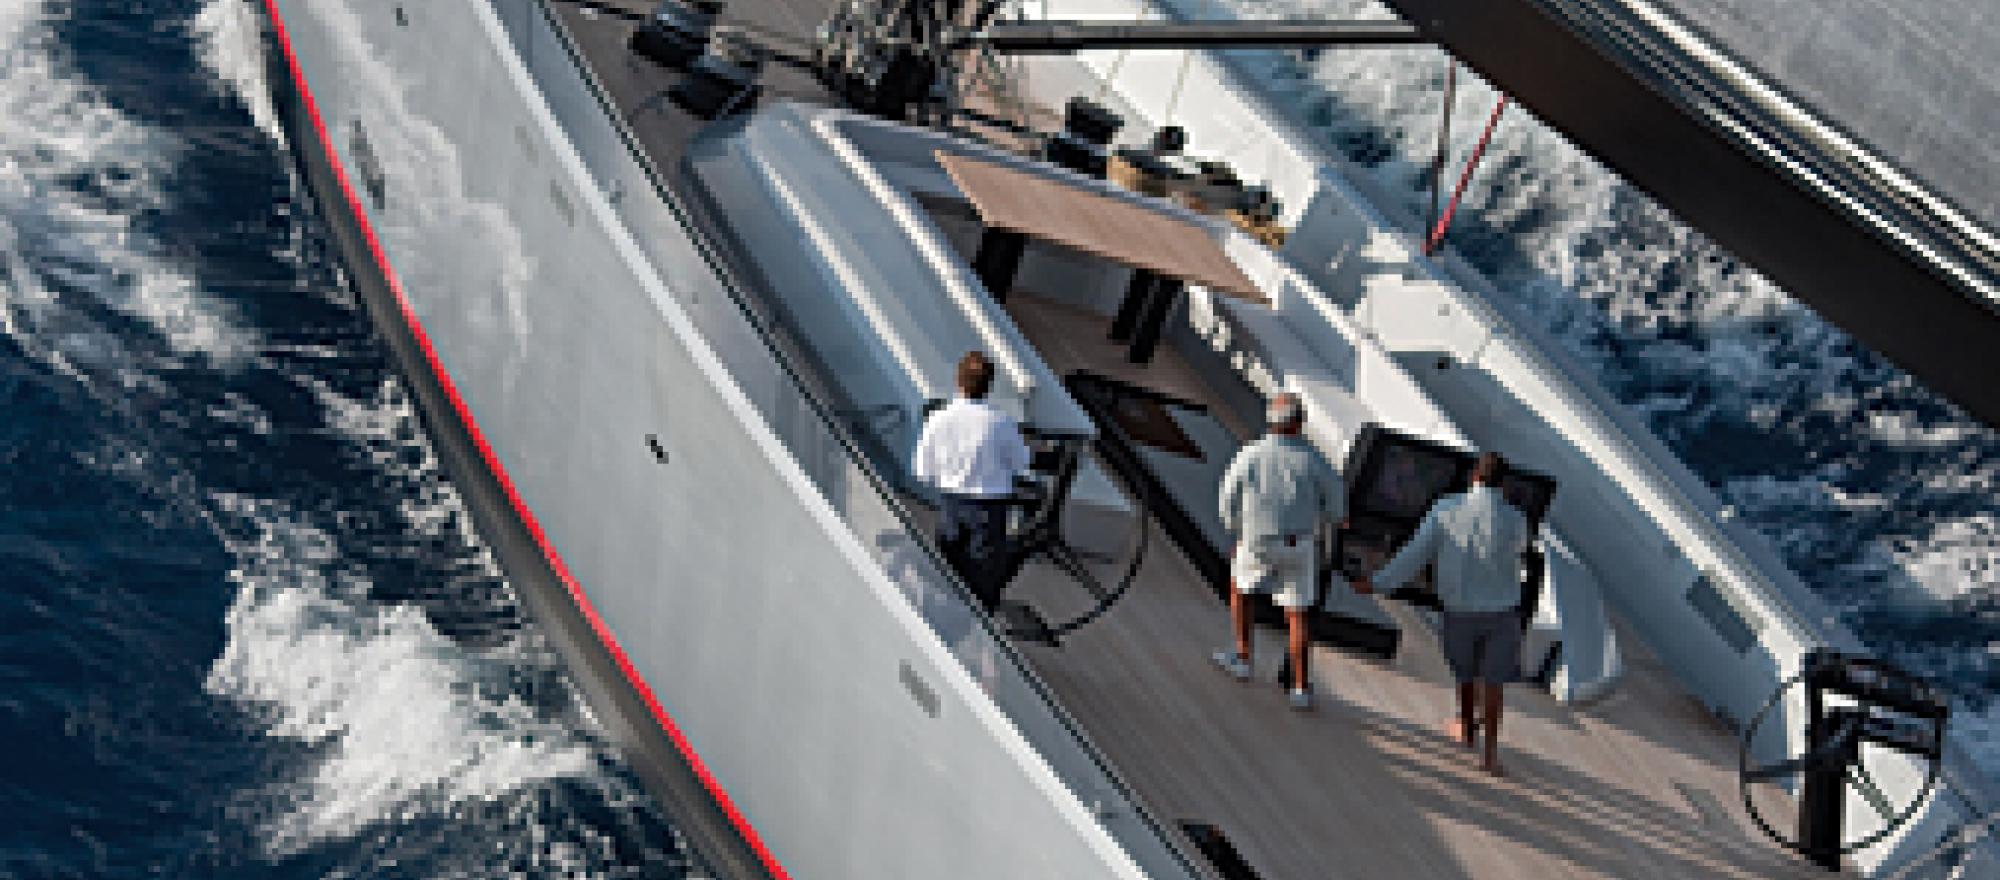 Amenities on one sailing yacht include 21-foot tenders for waterskiing or fis